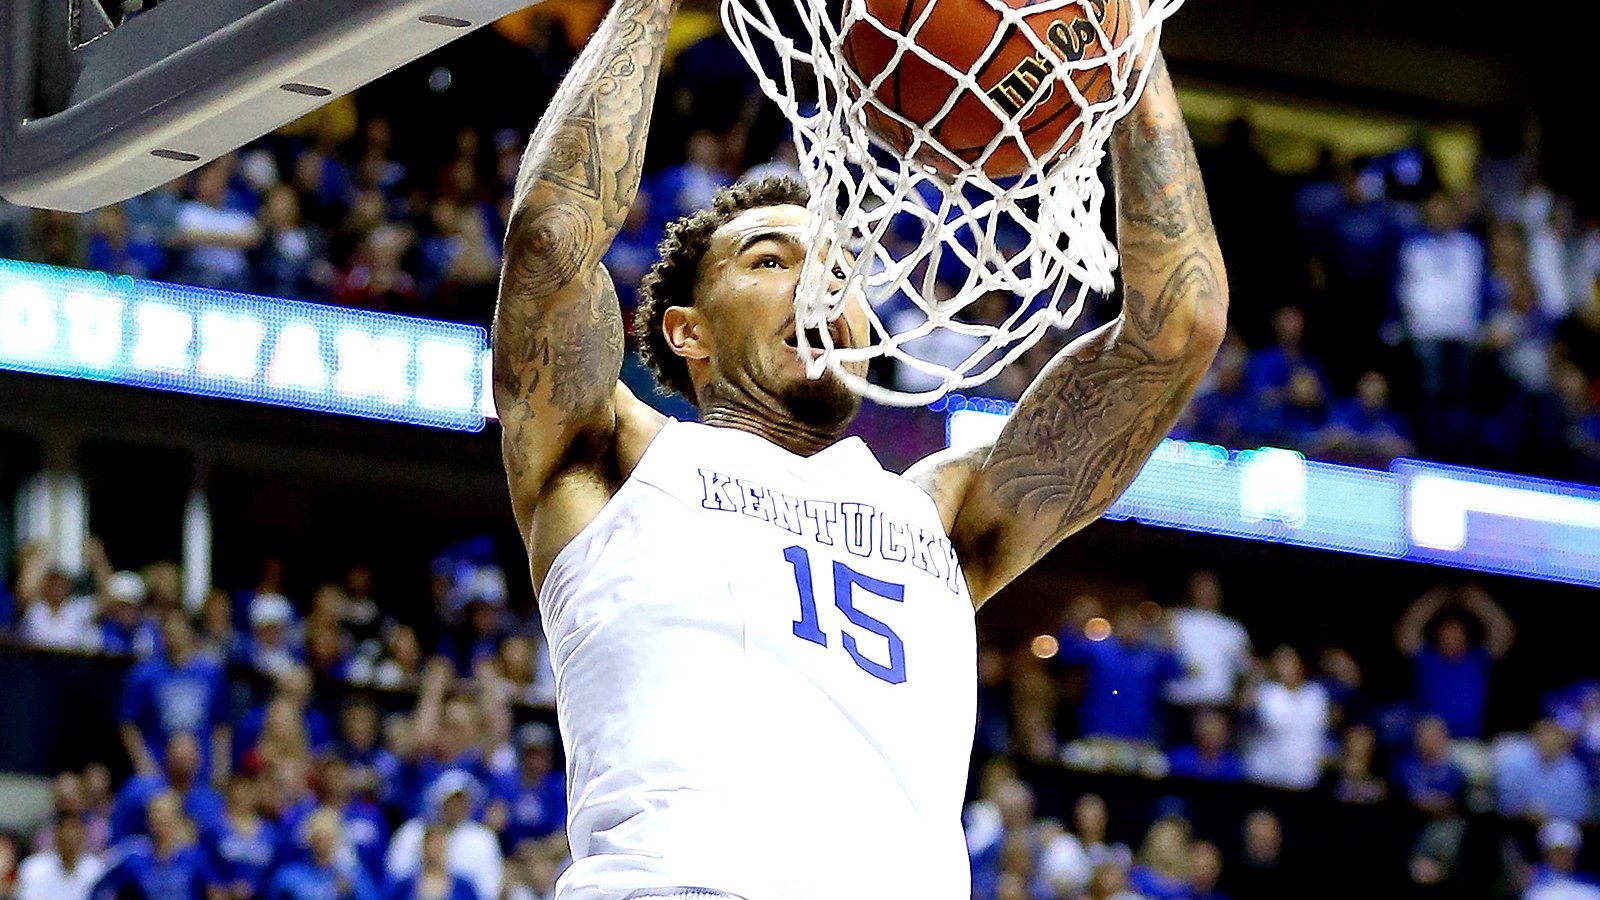 Willie Cauley-Stein #15 of the Kentucky Wildcats dunks on March 15.